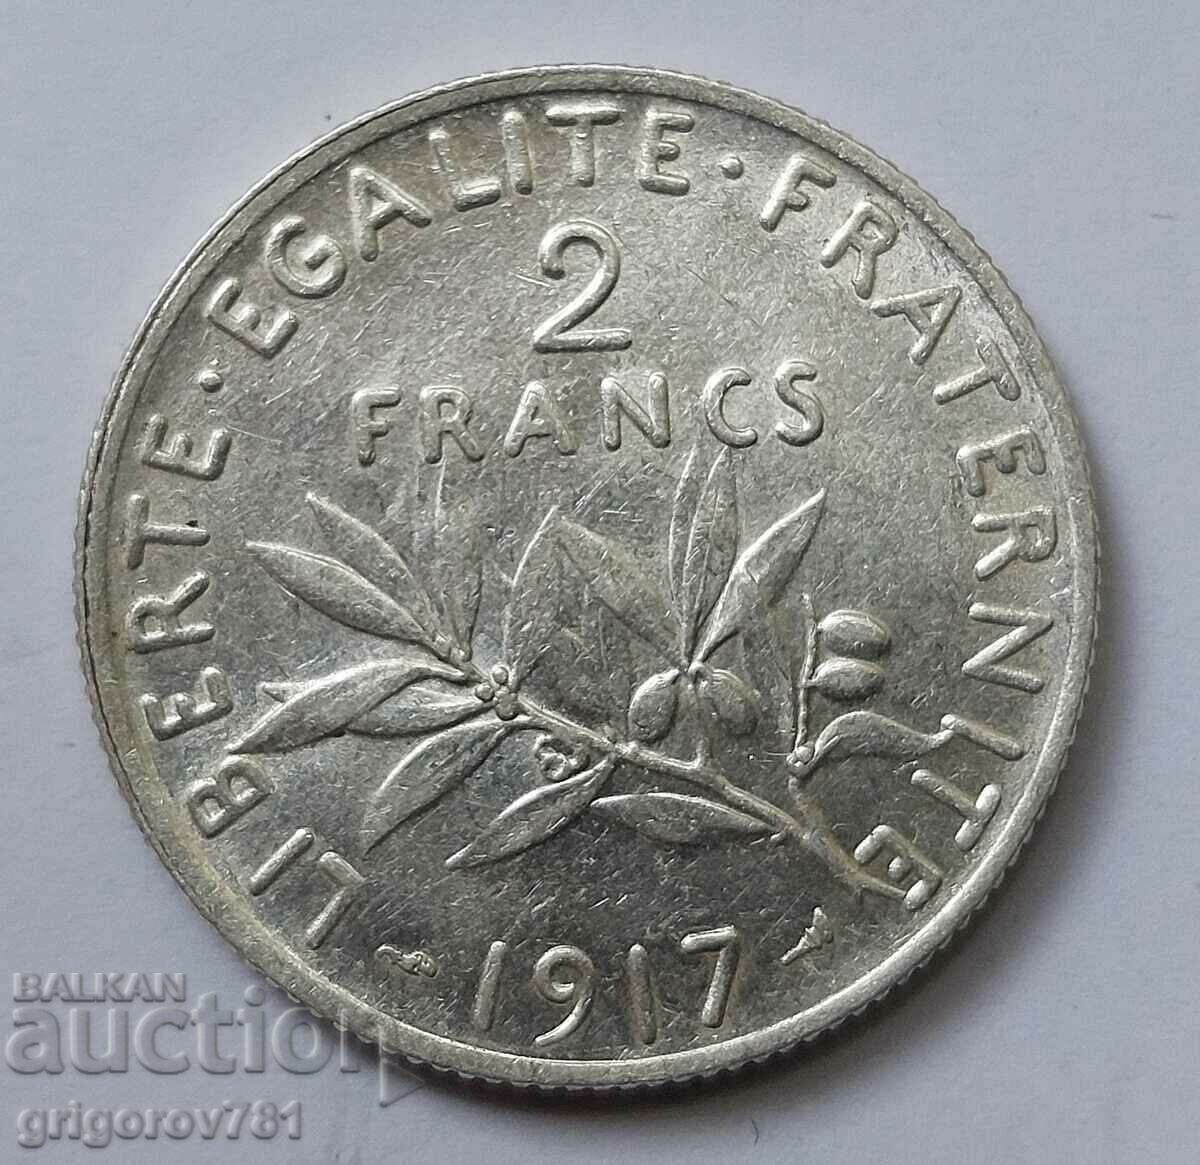 2 Francs Silver France 1917 - Silver Coin #47